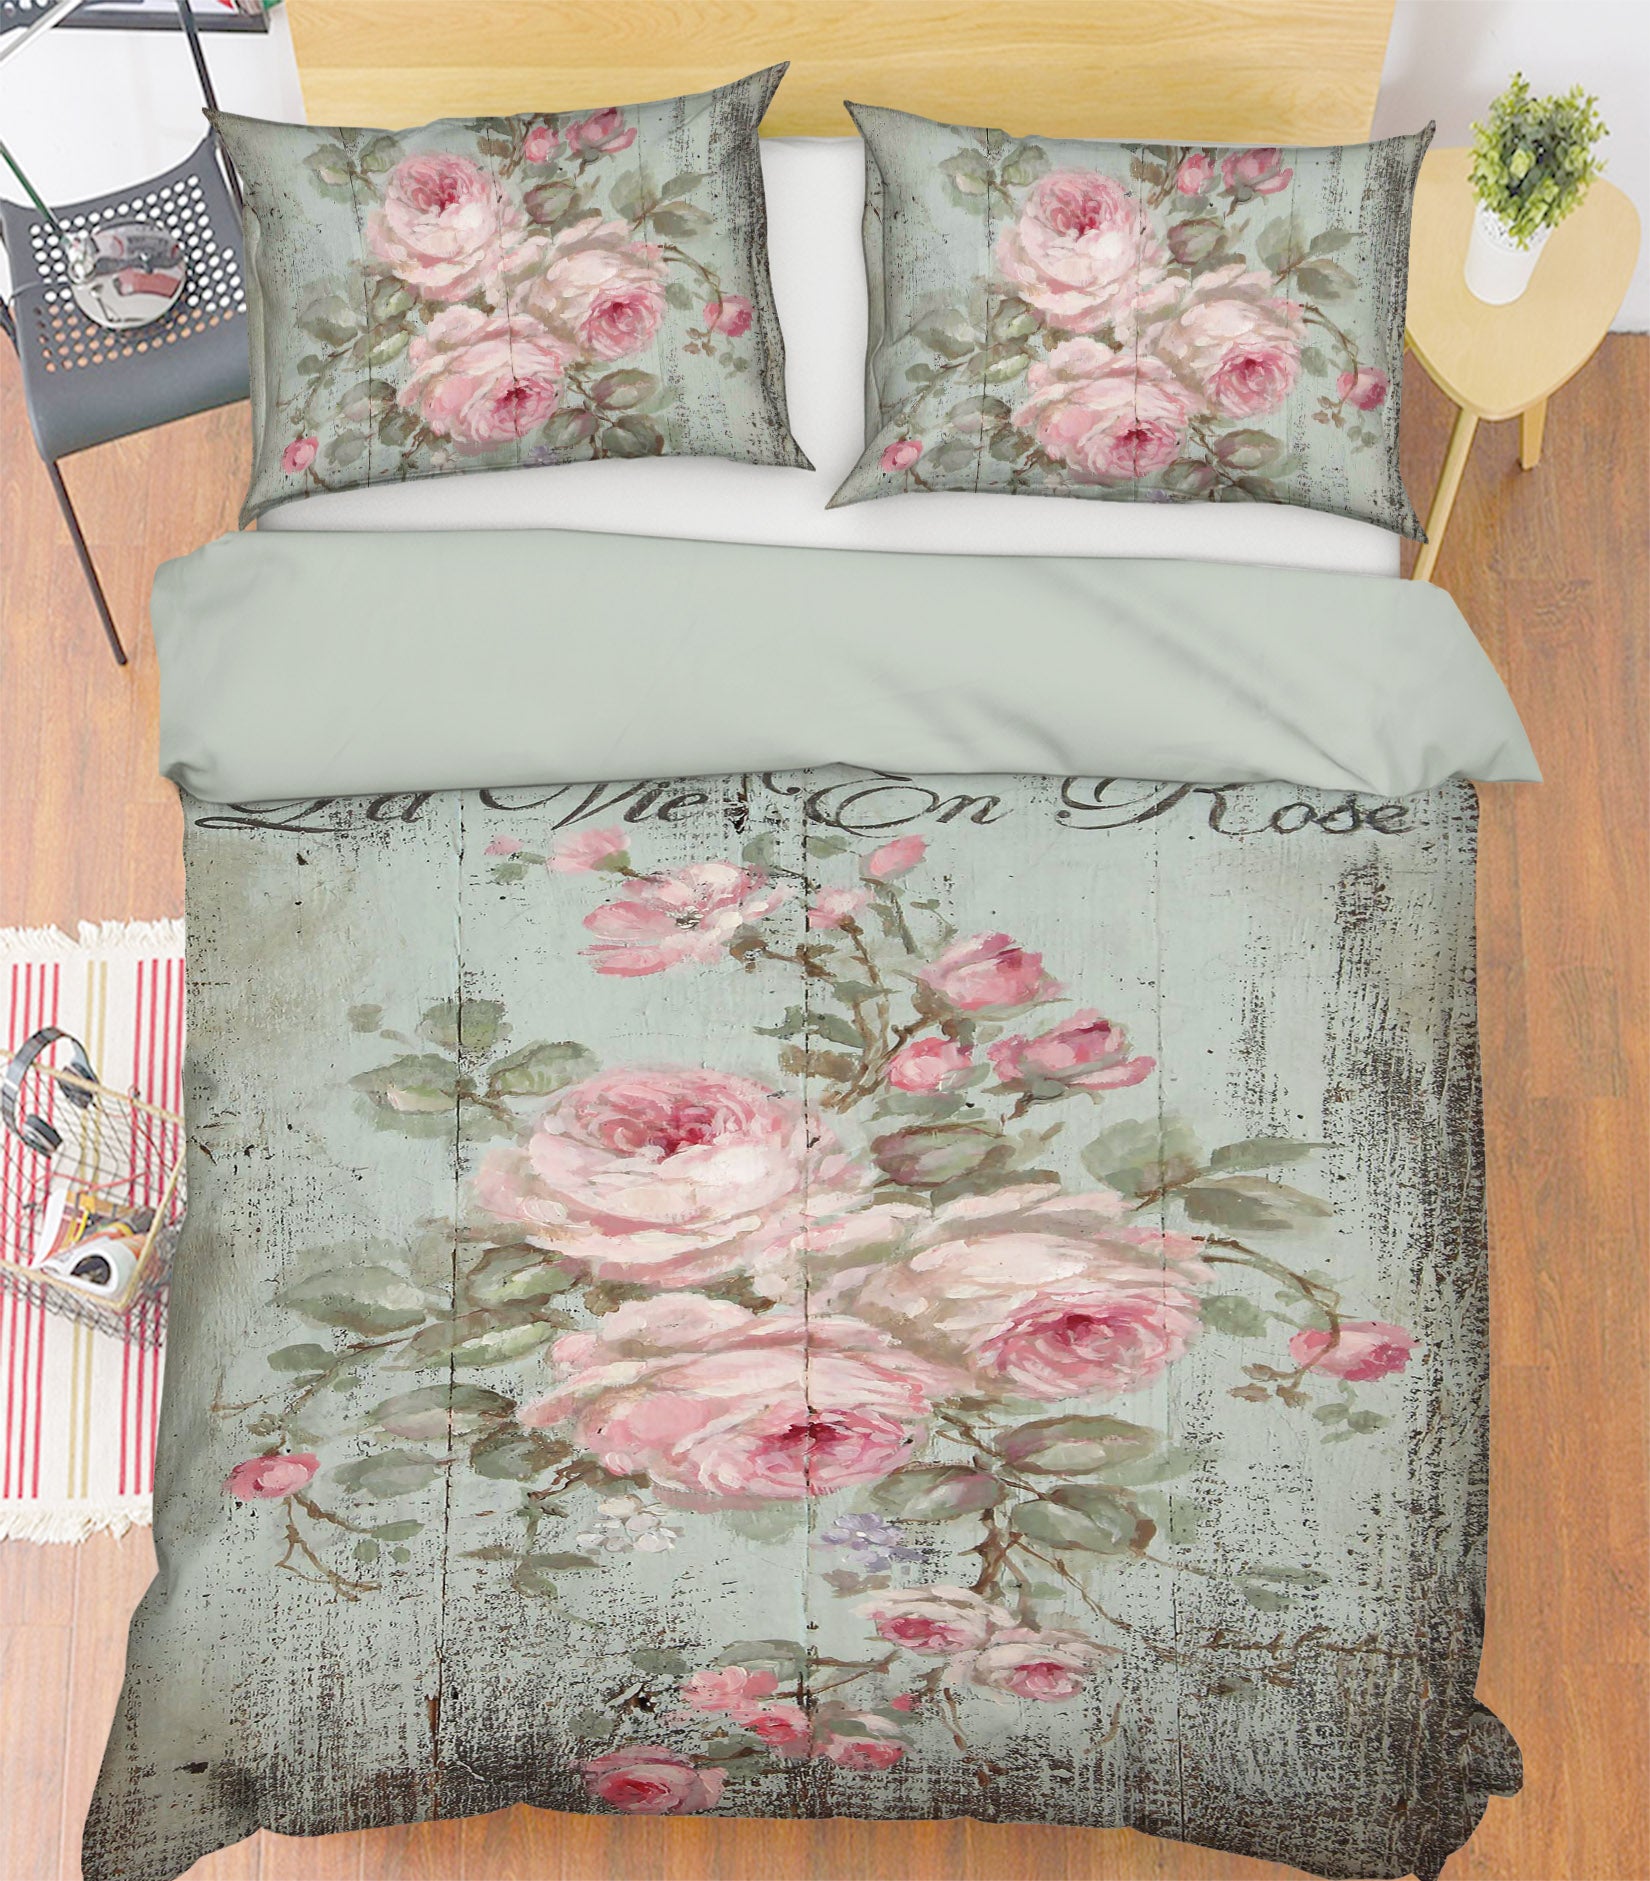 3D Pink Rose 032 Debi Coules Bedding Bed Pillowcases Quilt